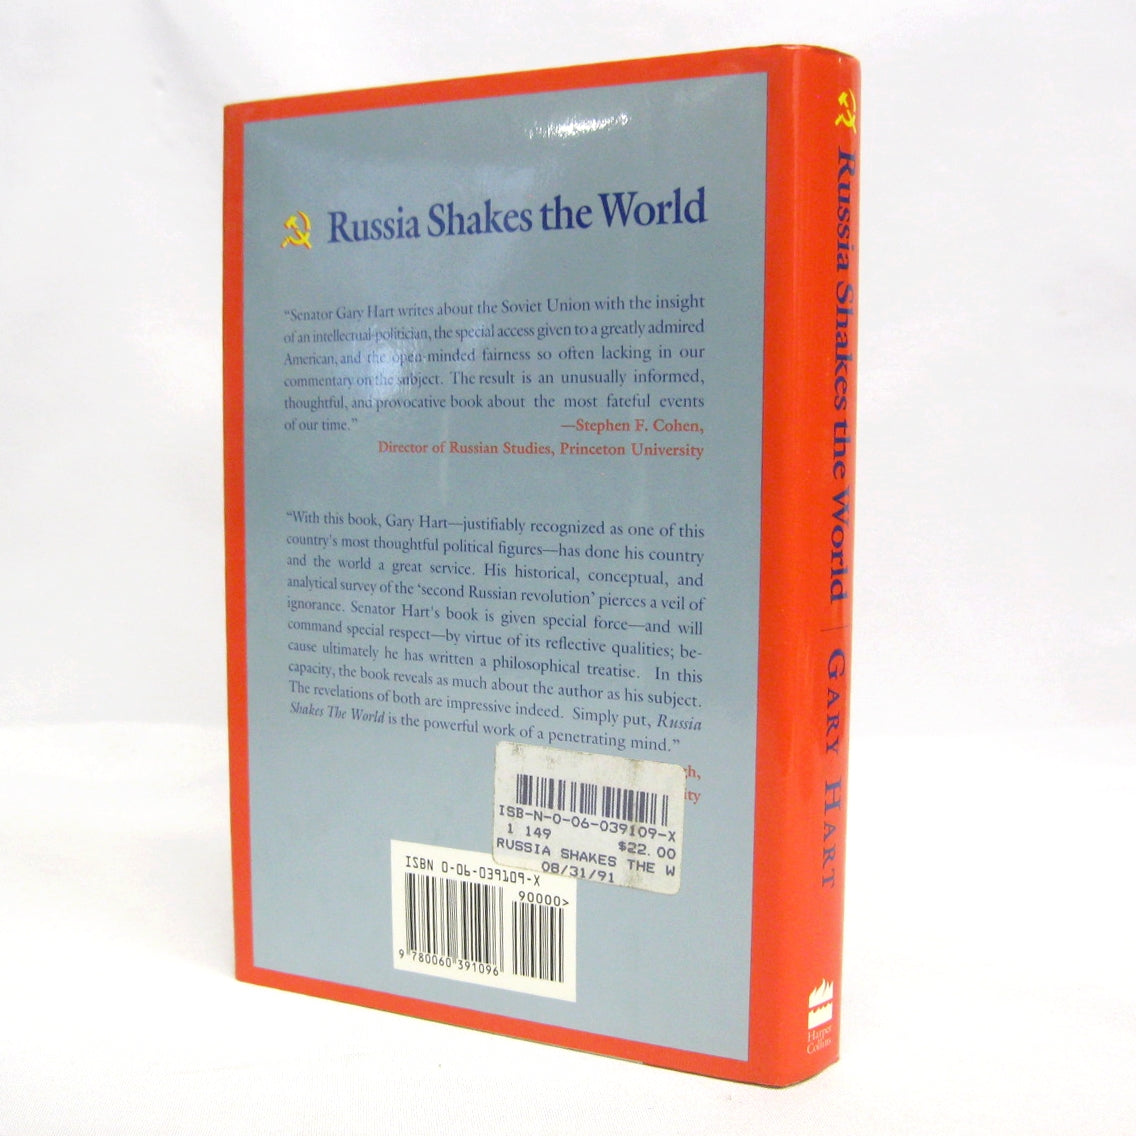 Russia Shakes the World: The Second Russian Revolution and its Impact on the West by Gary Hart